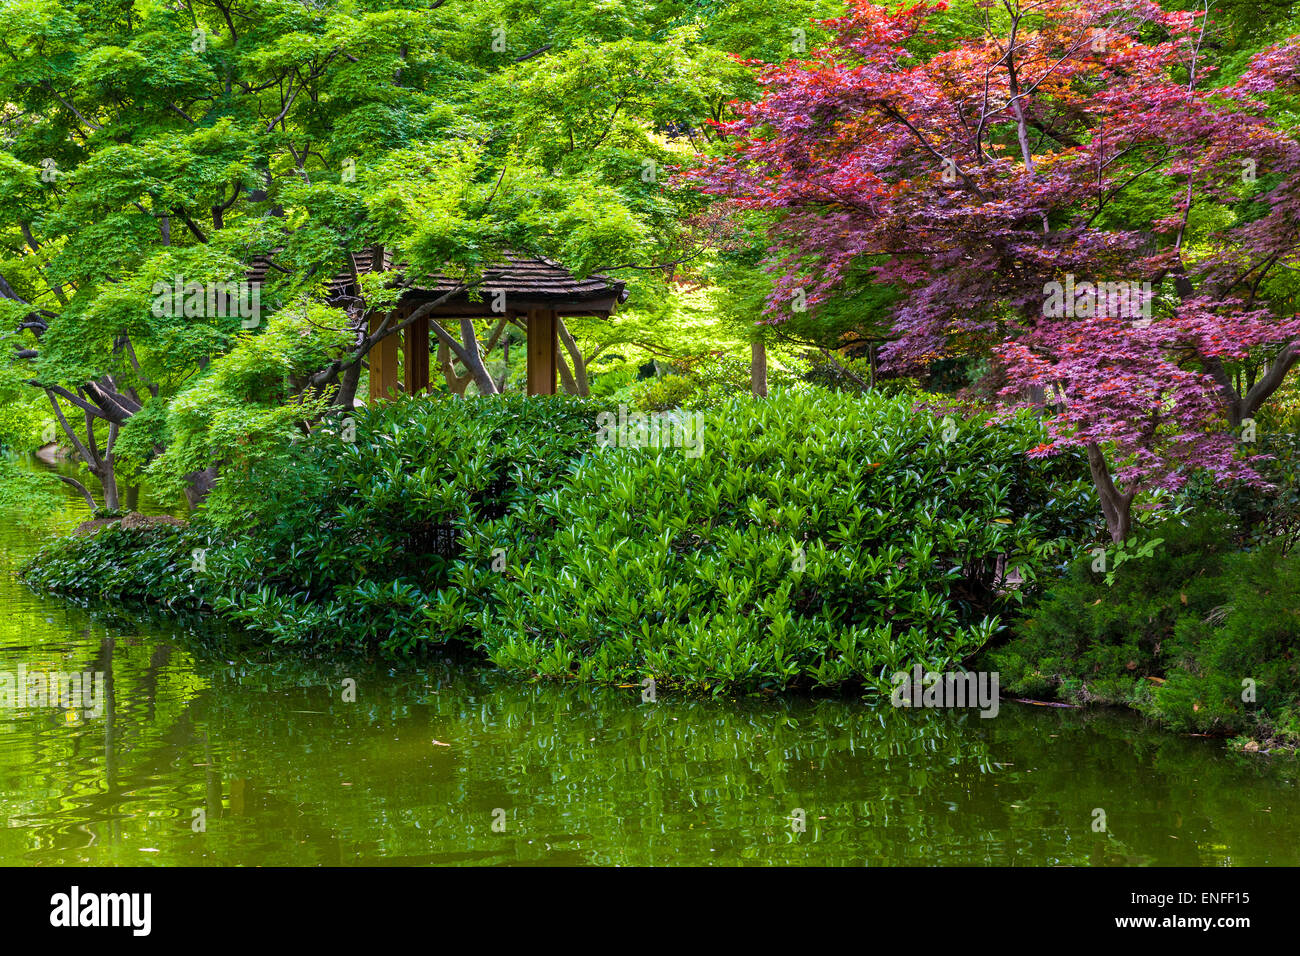 Quiet Spot At An Overlook In The Japanese Botanical Gardens In